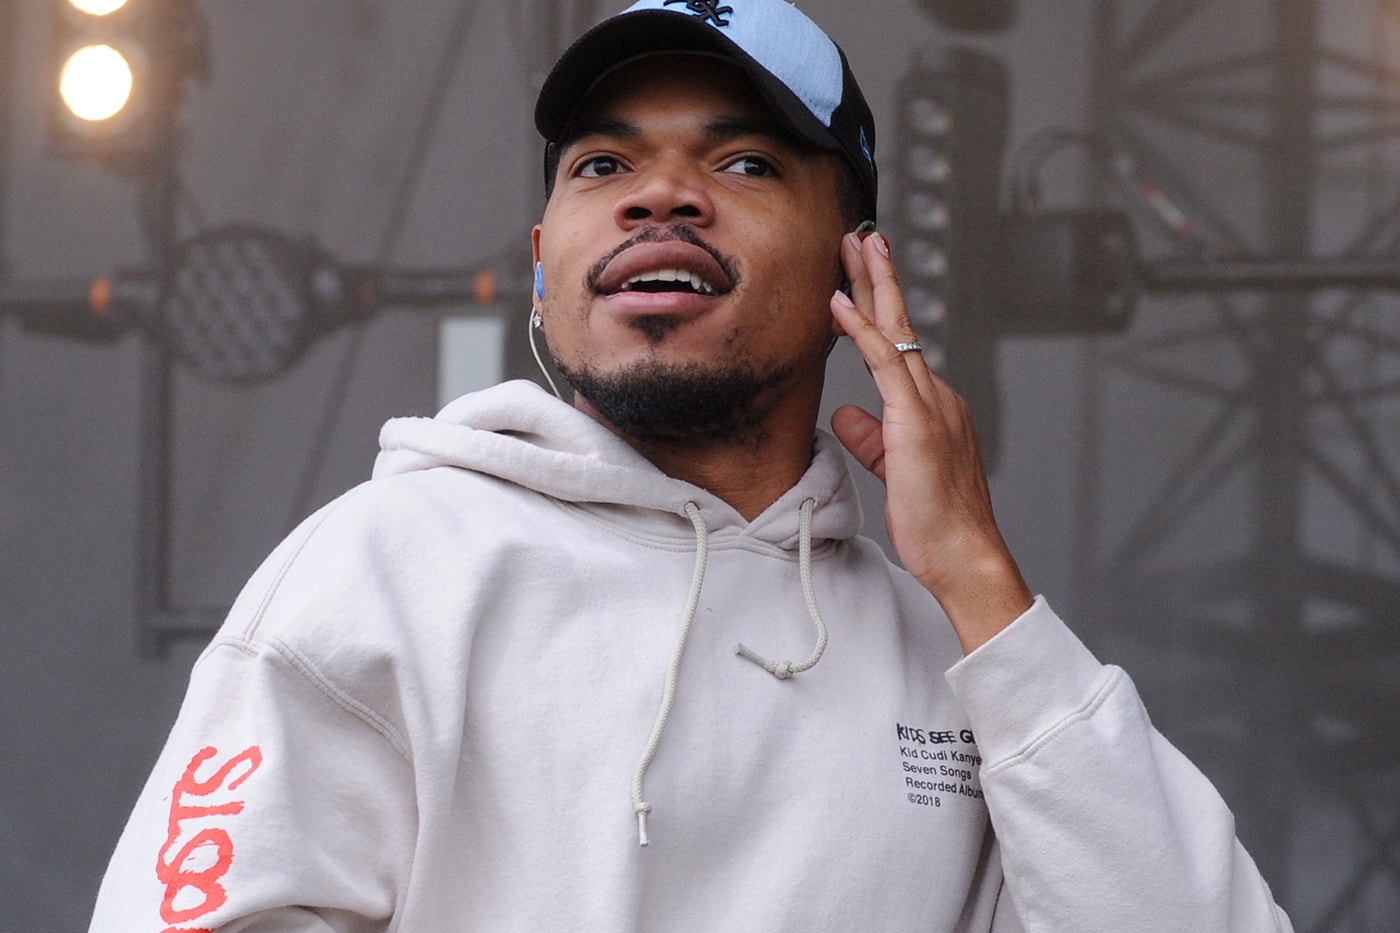 Chance the Rapper's Birthday Party $2,500 USD VIP Seat $100 Ticket Social Works